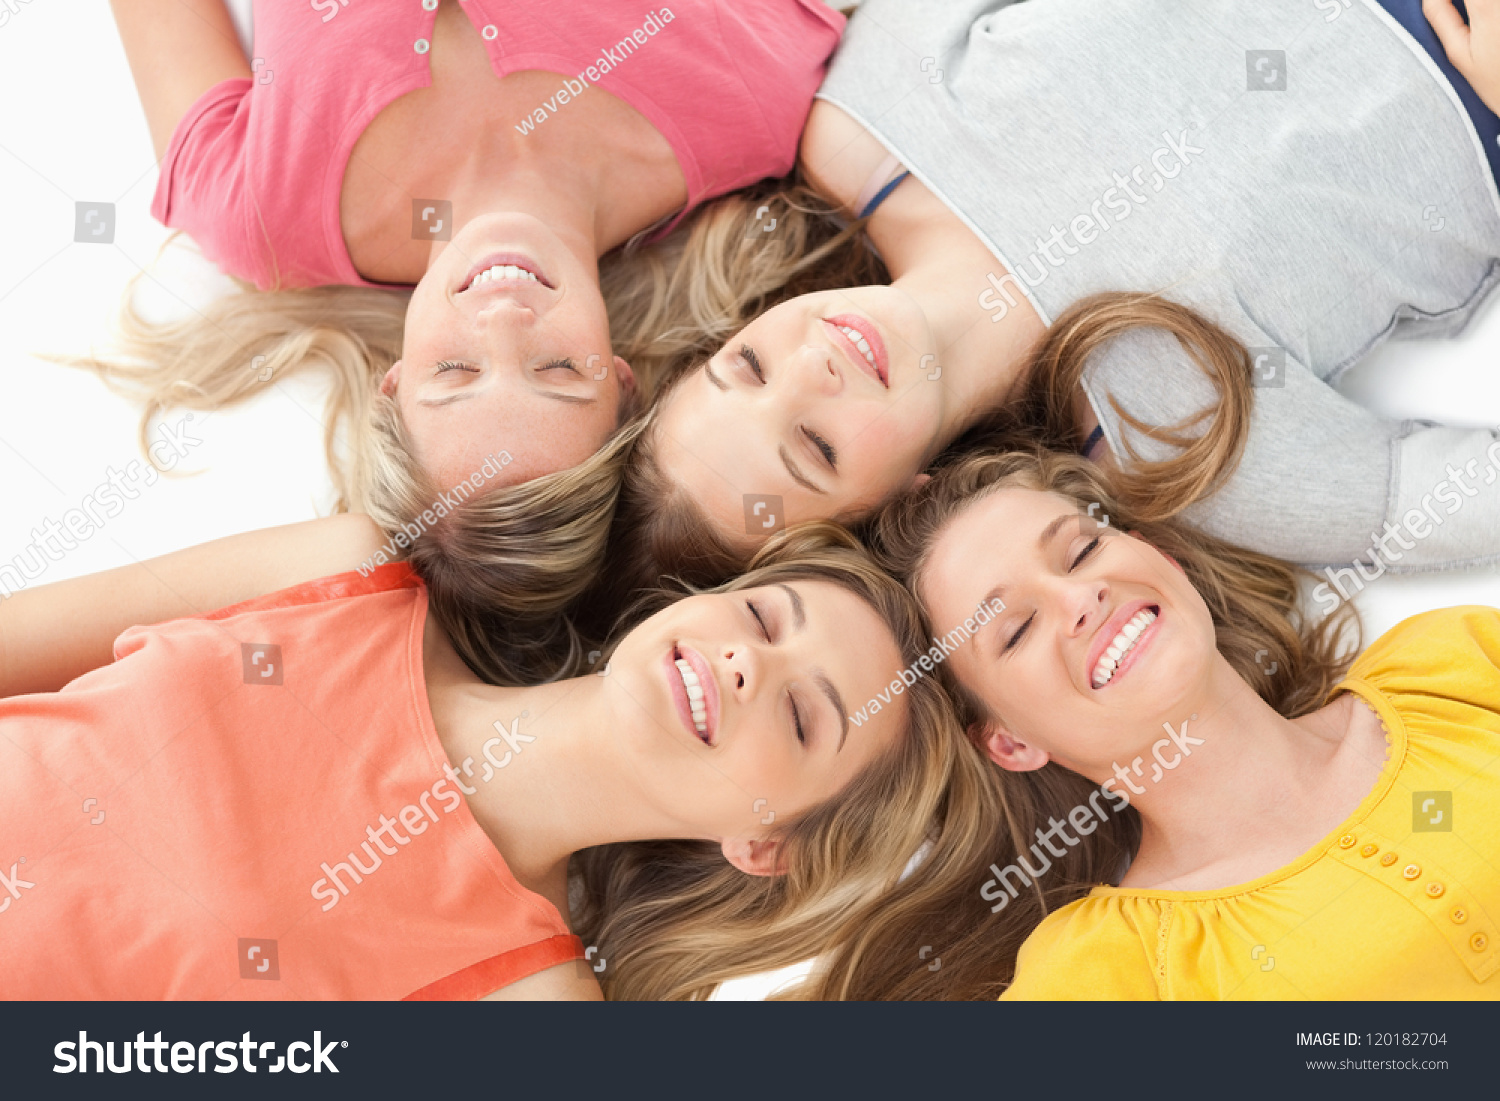 Four girls lying on the ground with their eyes closed and smiling #120182704